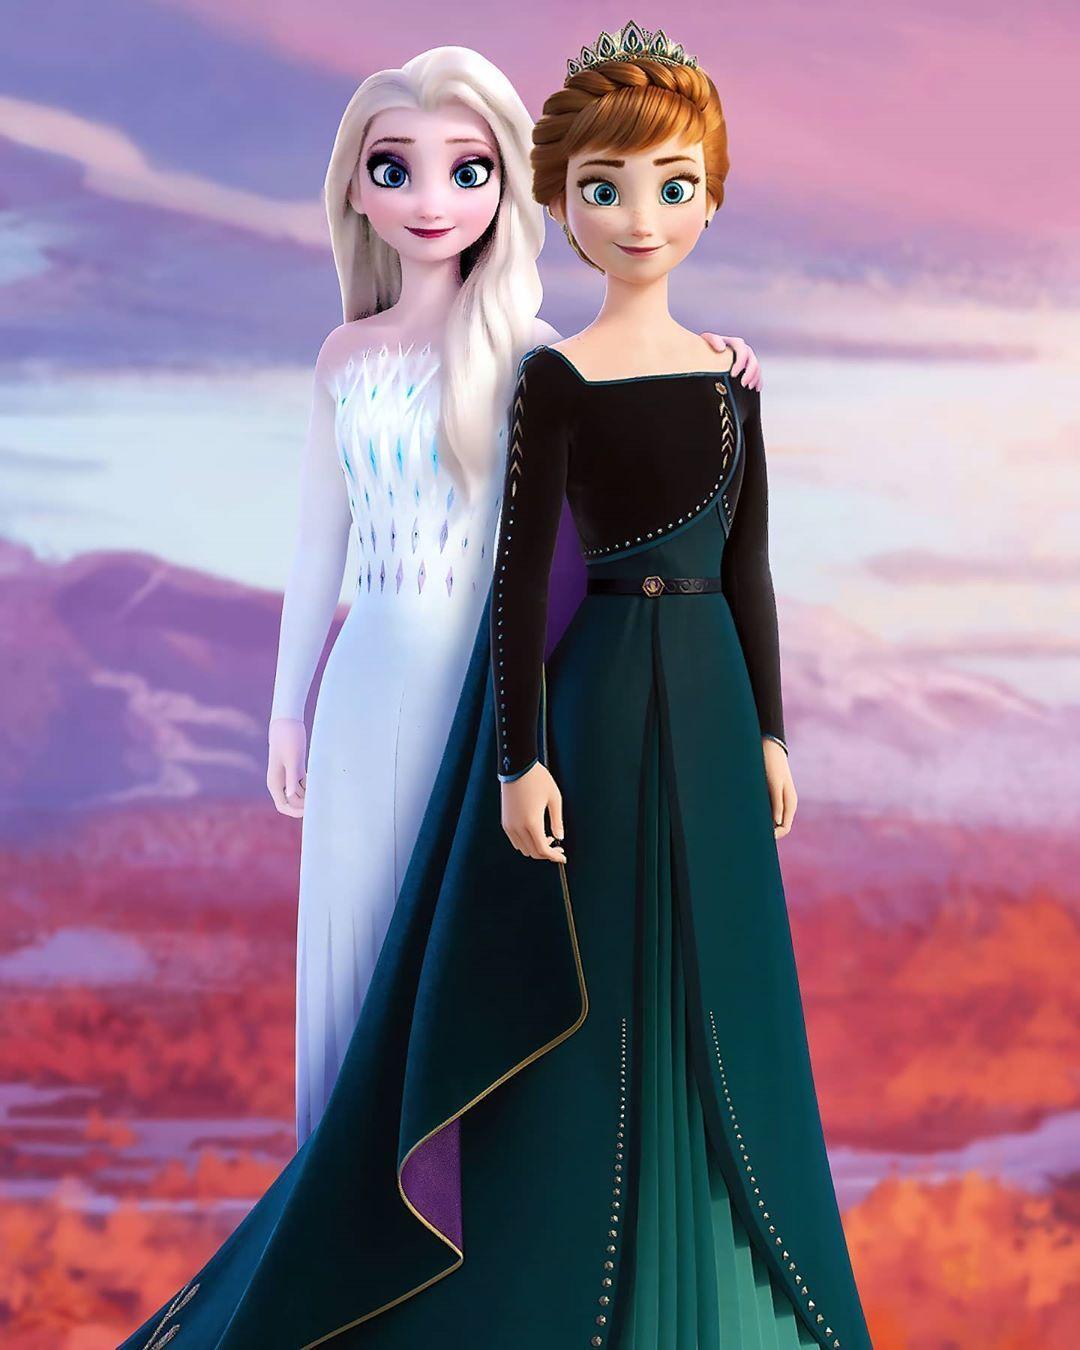 Anna and Elsa Frozen Wallpapers - Top Free Anna and Elsa Frozen Backgrounds  - WallpaperAccess